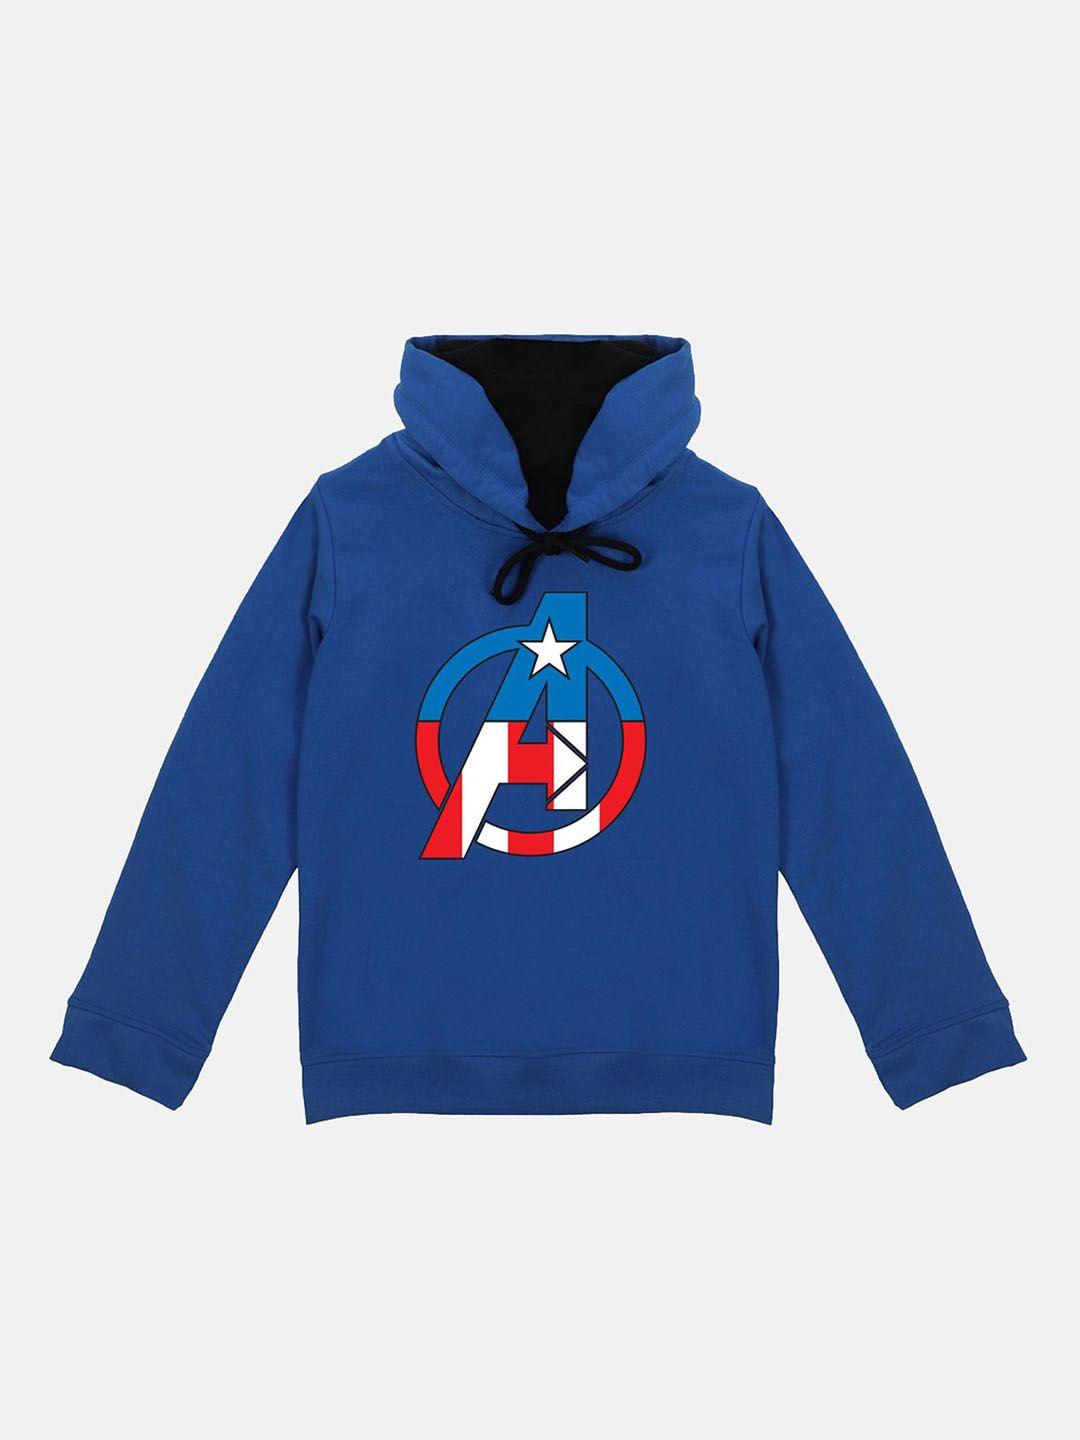 marvel by wear your mind kids blue & red avengers printed hooded sweatshirt